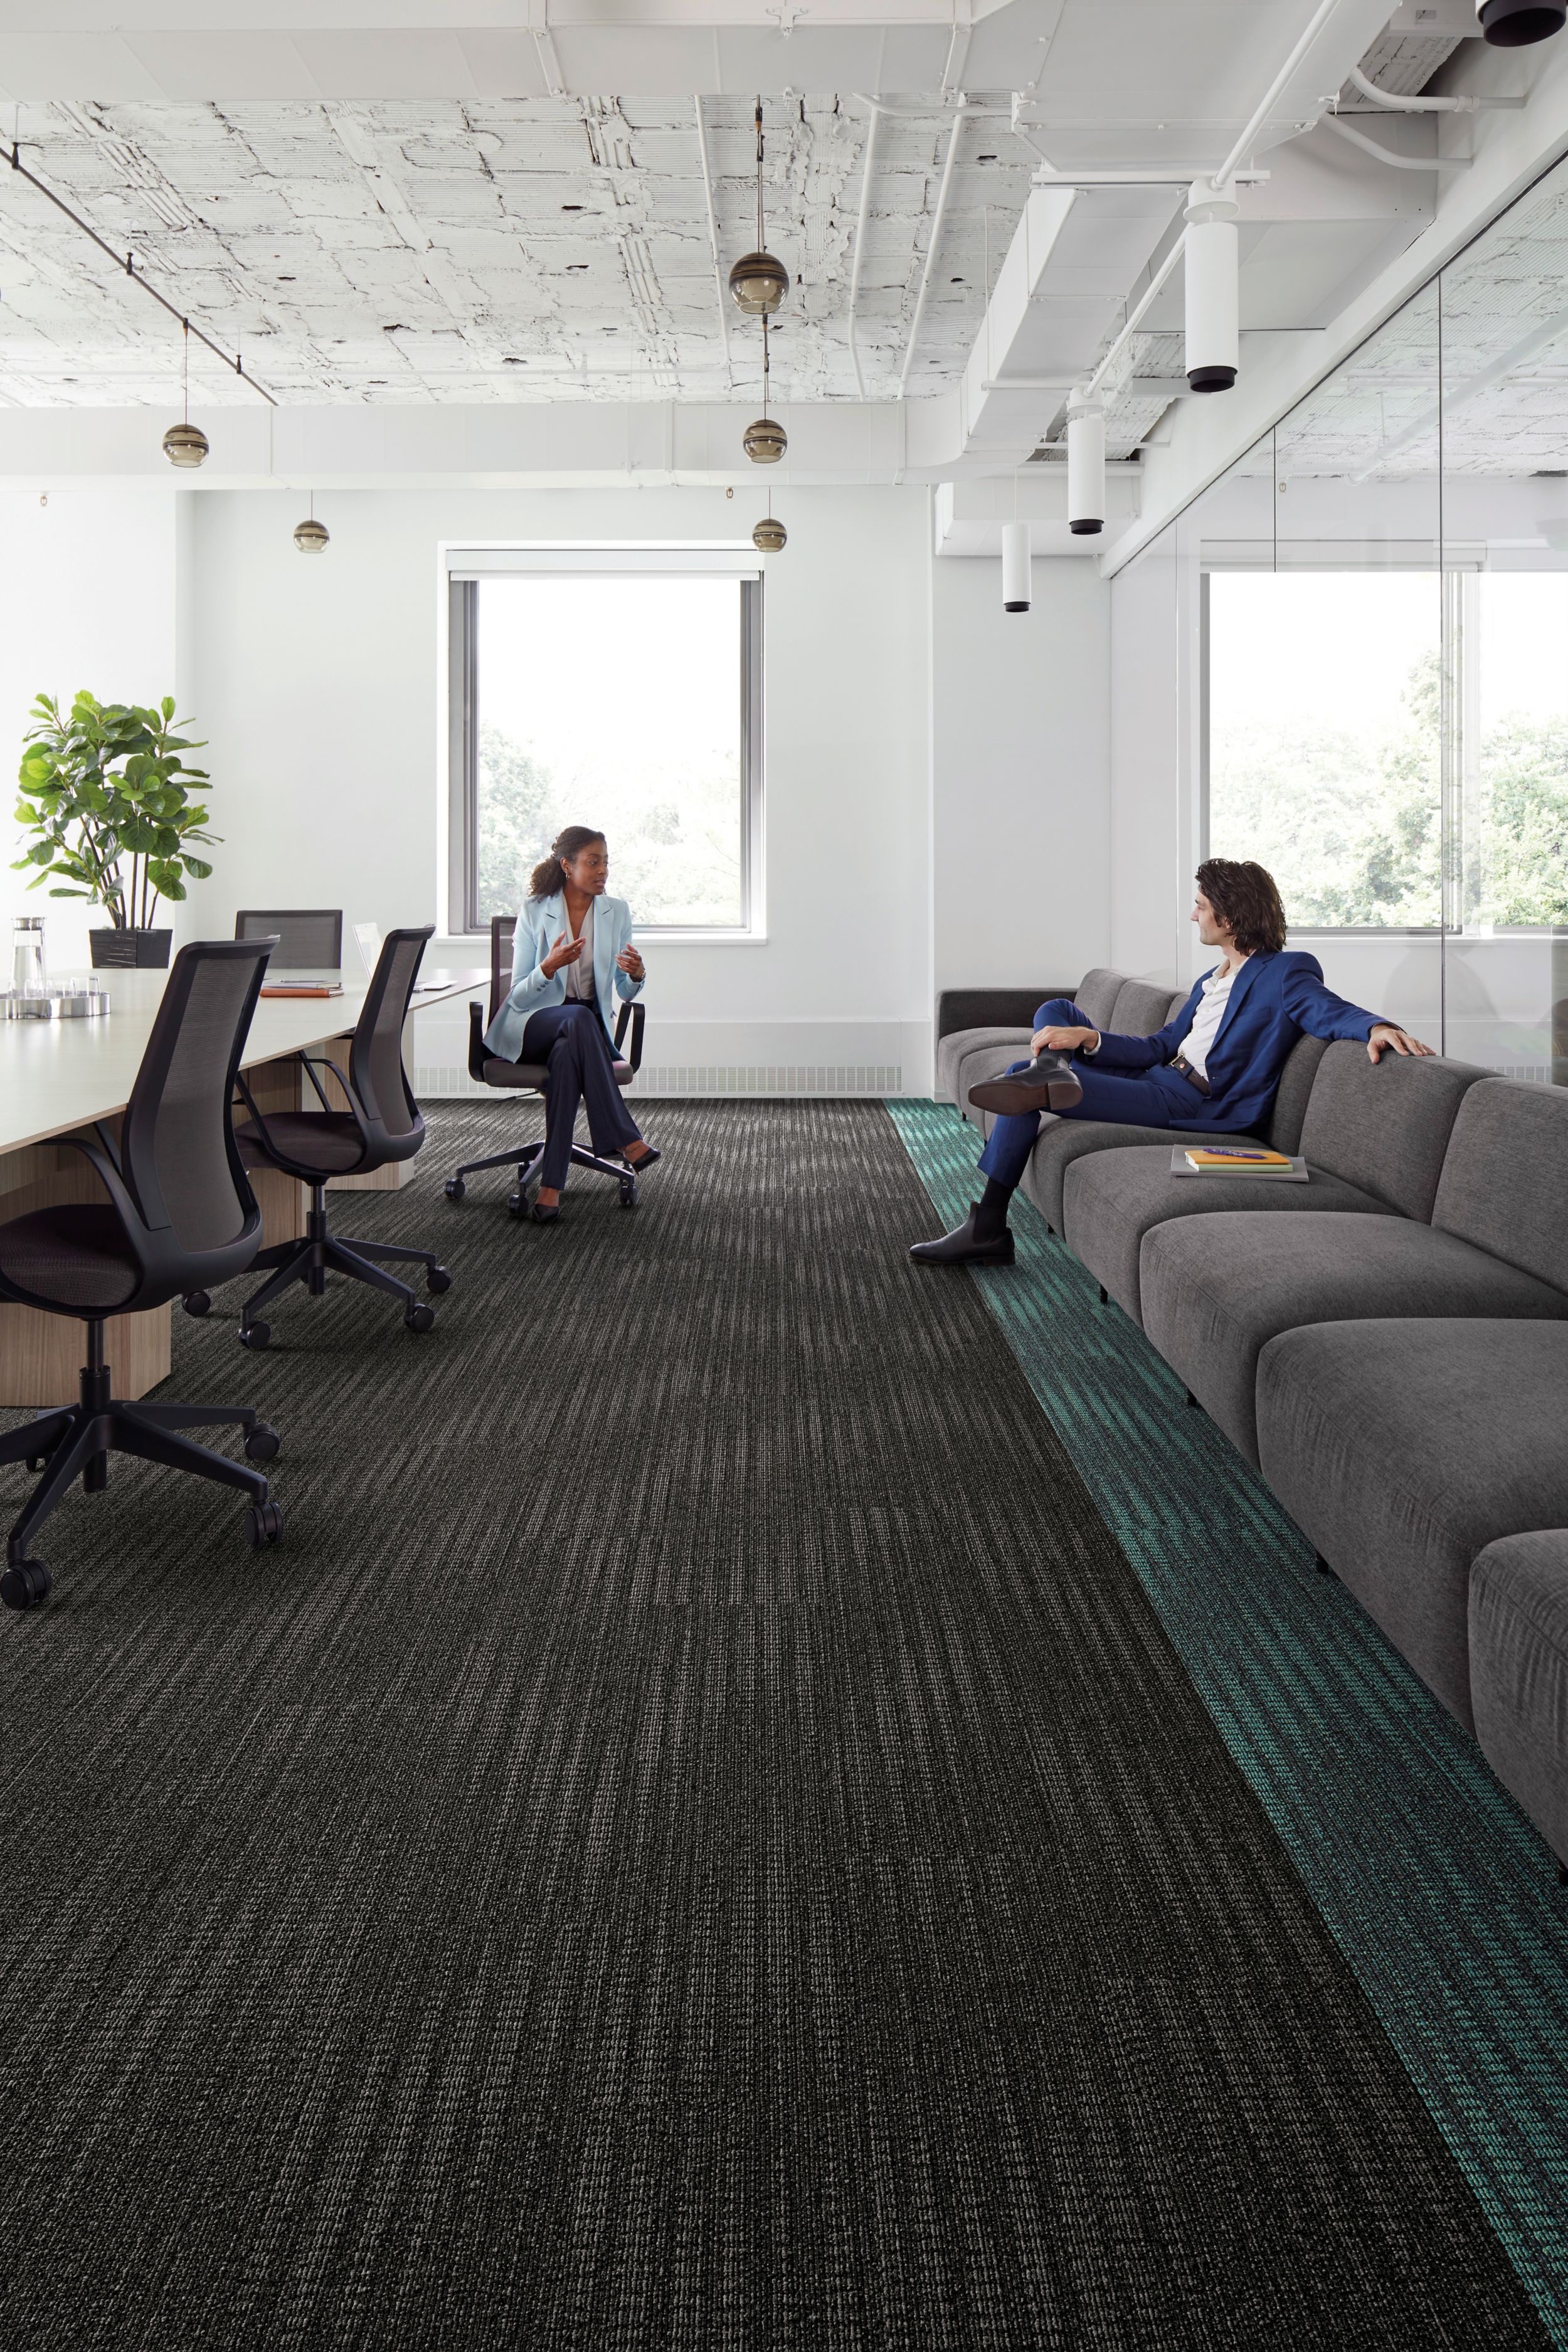 Interface Karmic Relief plank carpet tiles with man sitting on couch collaborating with woman in office chair image number 2